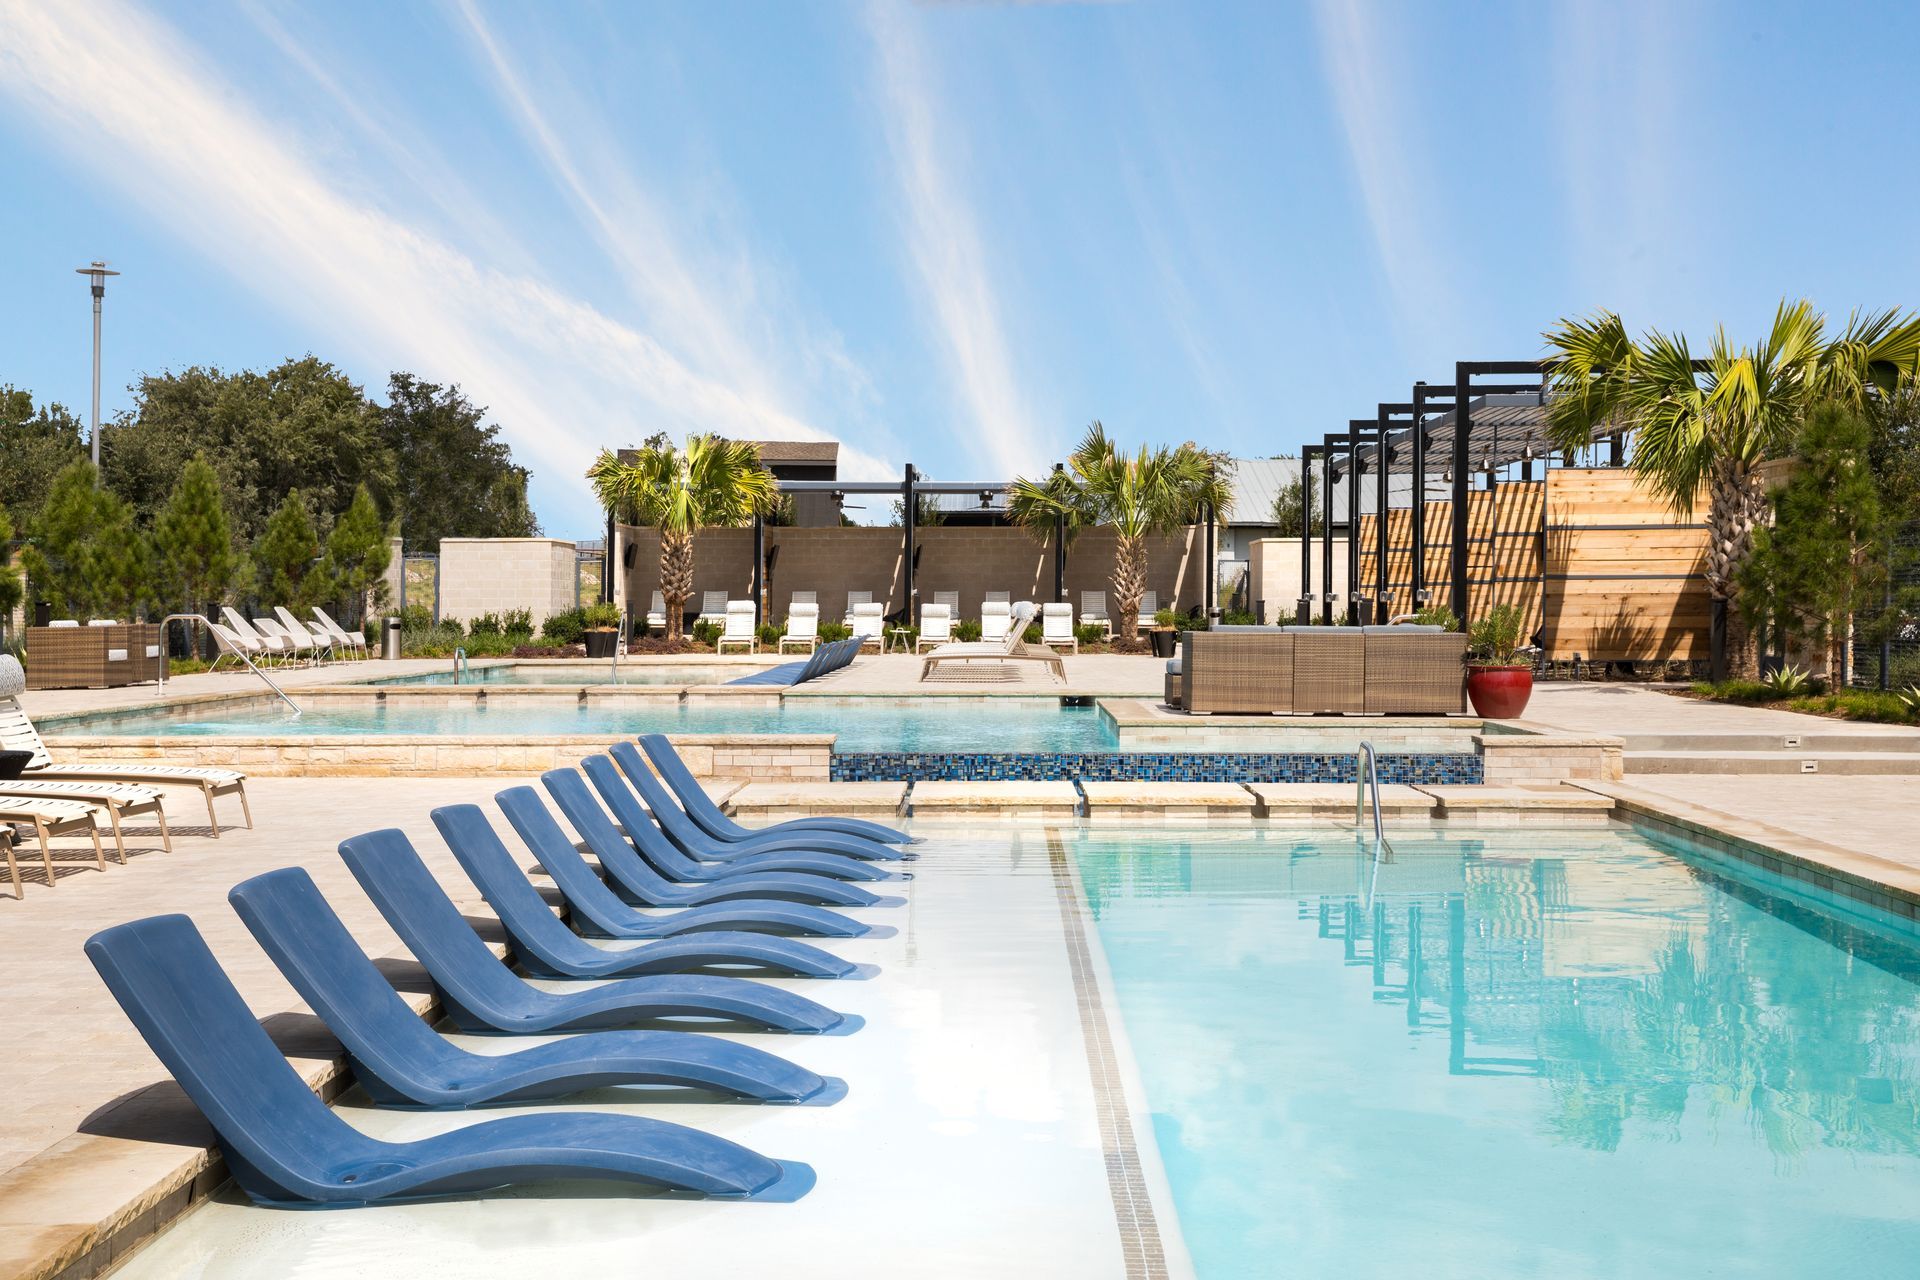 A row of blue lounge chairs are lined up next to a large swimming pool at Parkside at Craig Ranch.